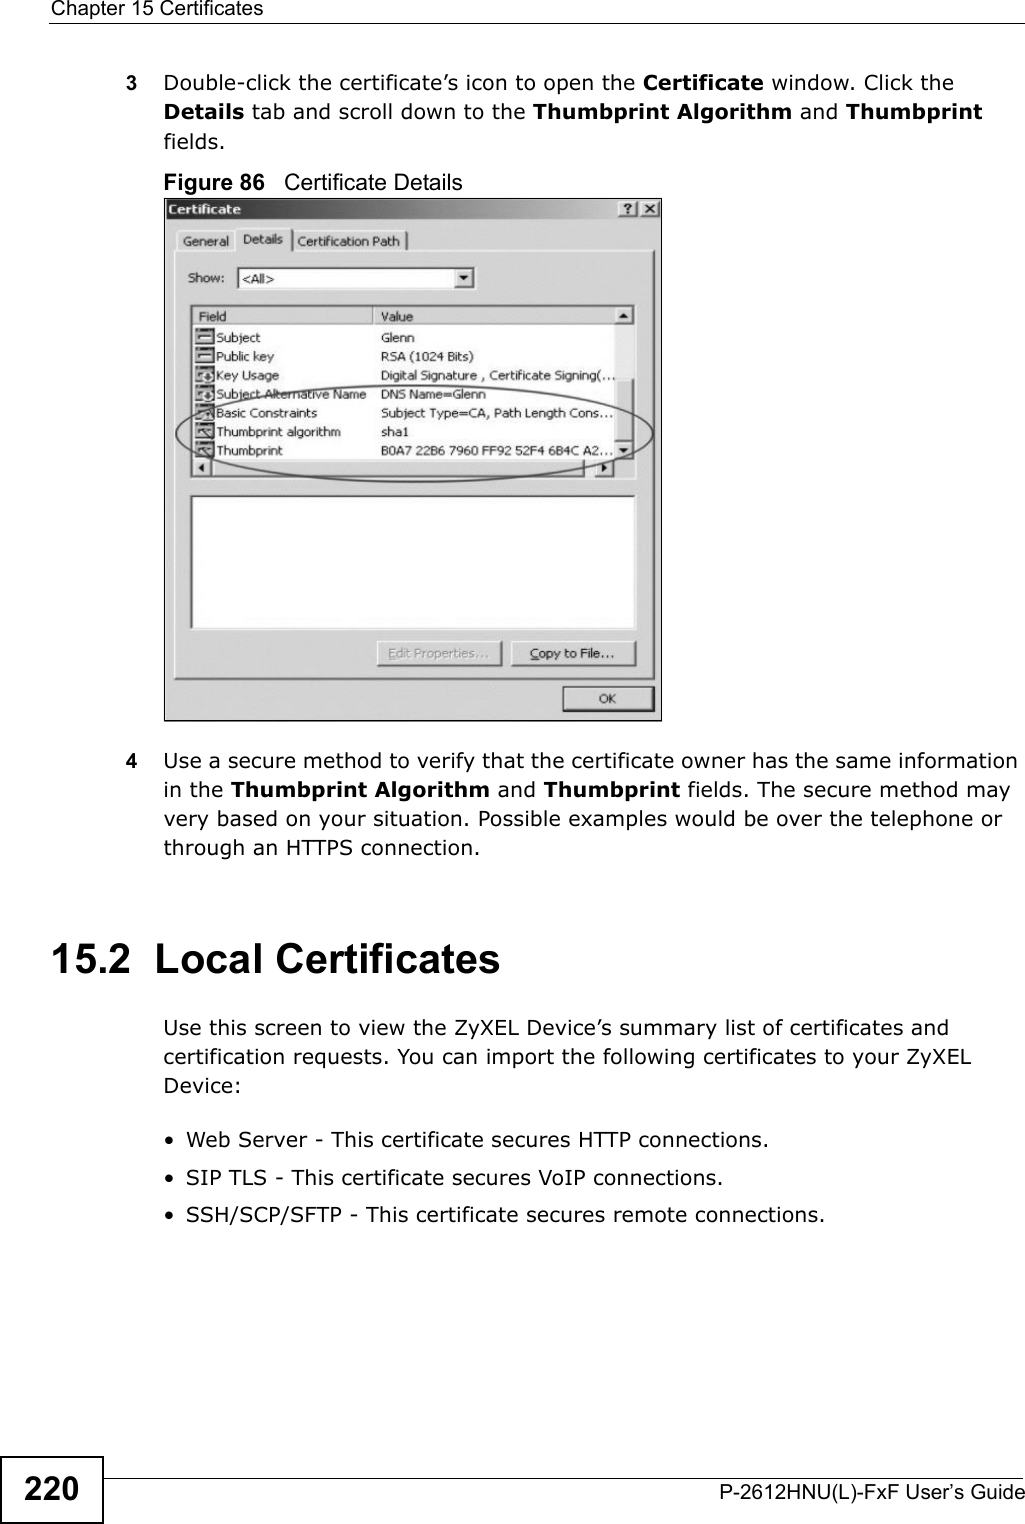 Chapter 15 CertificatesP-2612HNU(L)-FxF User’s Guide2203Double-click the certificate’s icon to open the Certificate window. Click theDetails tab and scroll down to the Thumbprint Algorithm and Thumbprintfields.Figure 86   Certificate Details 4Use a secure method to verify that the certificate owner has the same information in the Thumbprint Algorithm and Thumbprint fields. The secure method may very based on your situation. Possible examples would be over the telephone or through an HTTPS connection. 15.2  Local CertificatesUse this screen to view the ZyXEL Device’s summary list of certificates and certification requests. You can import the following certificates to your ZyXEL Device:• Web Server - This certificate secures HTTP connections.• SIP TLS - This certificate secures VoIP connections.• SSH/SCP/SFTP - This certificate secures remote connections.